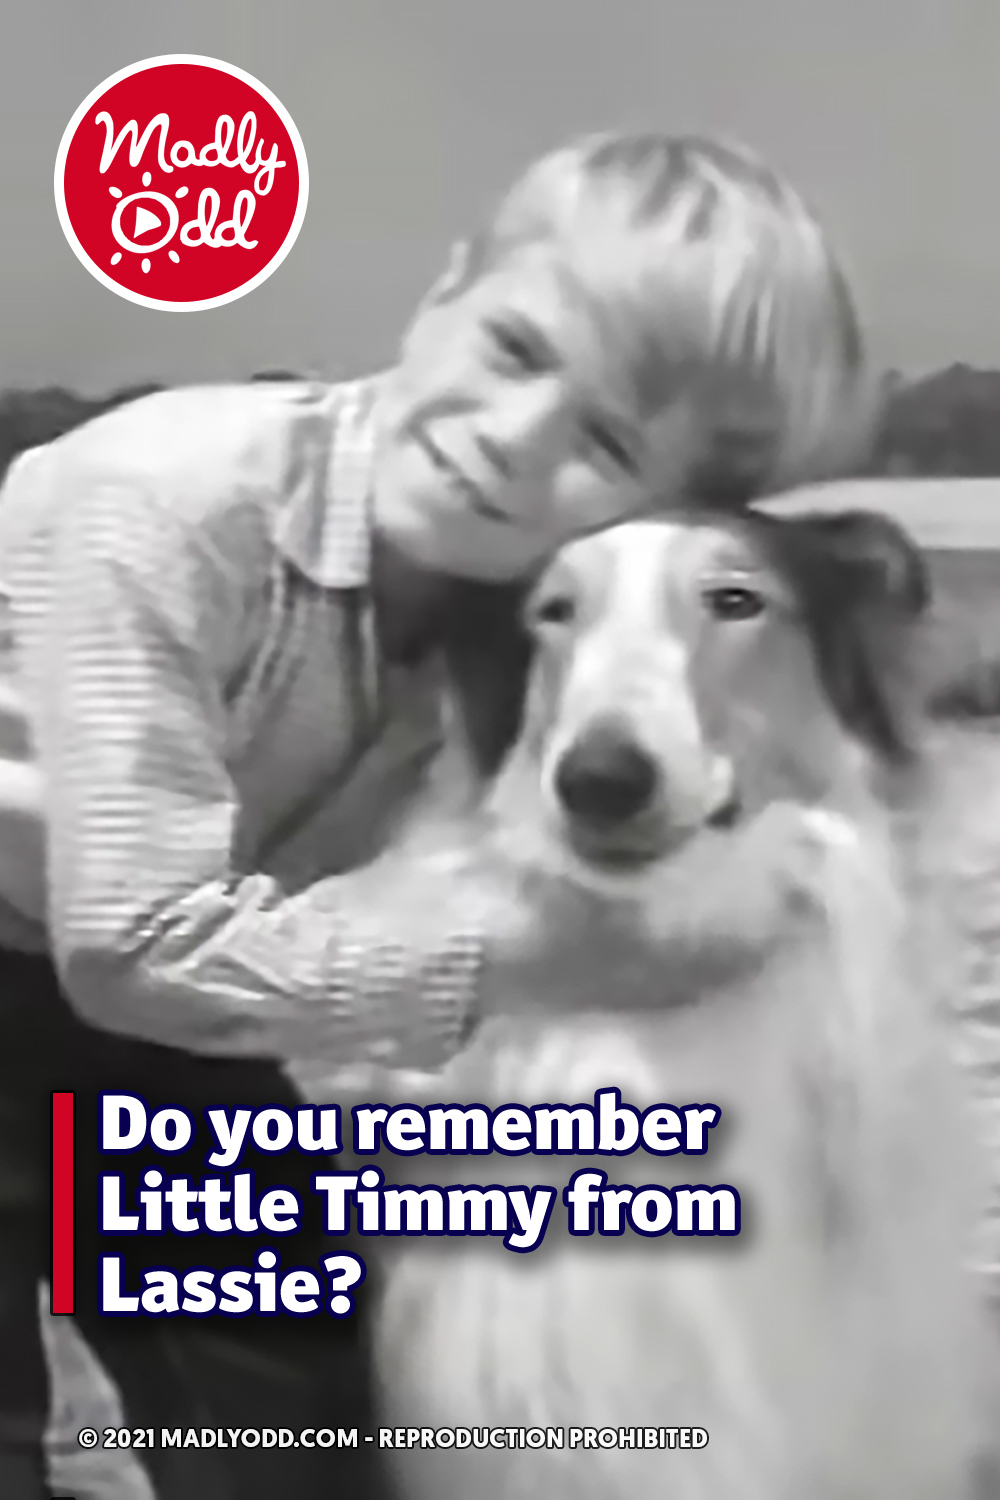 Do you remember Little Timmy from Lassie?